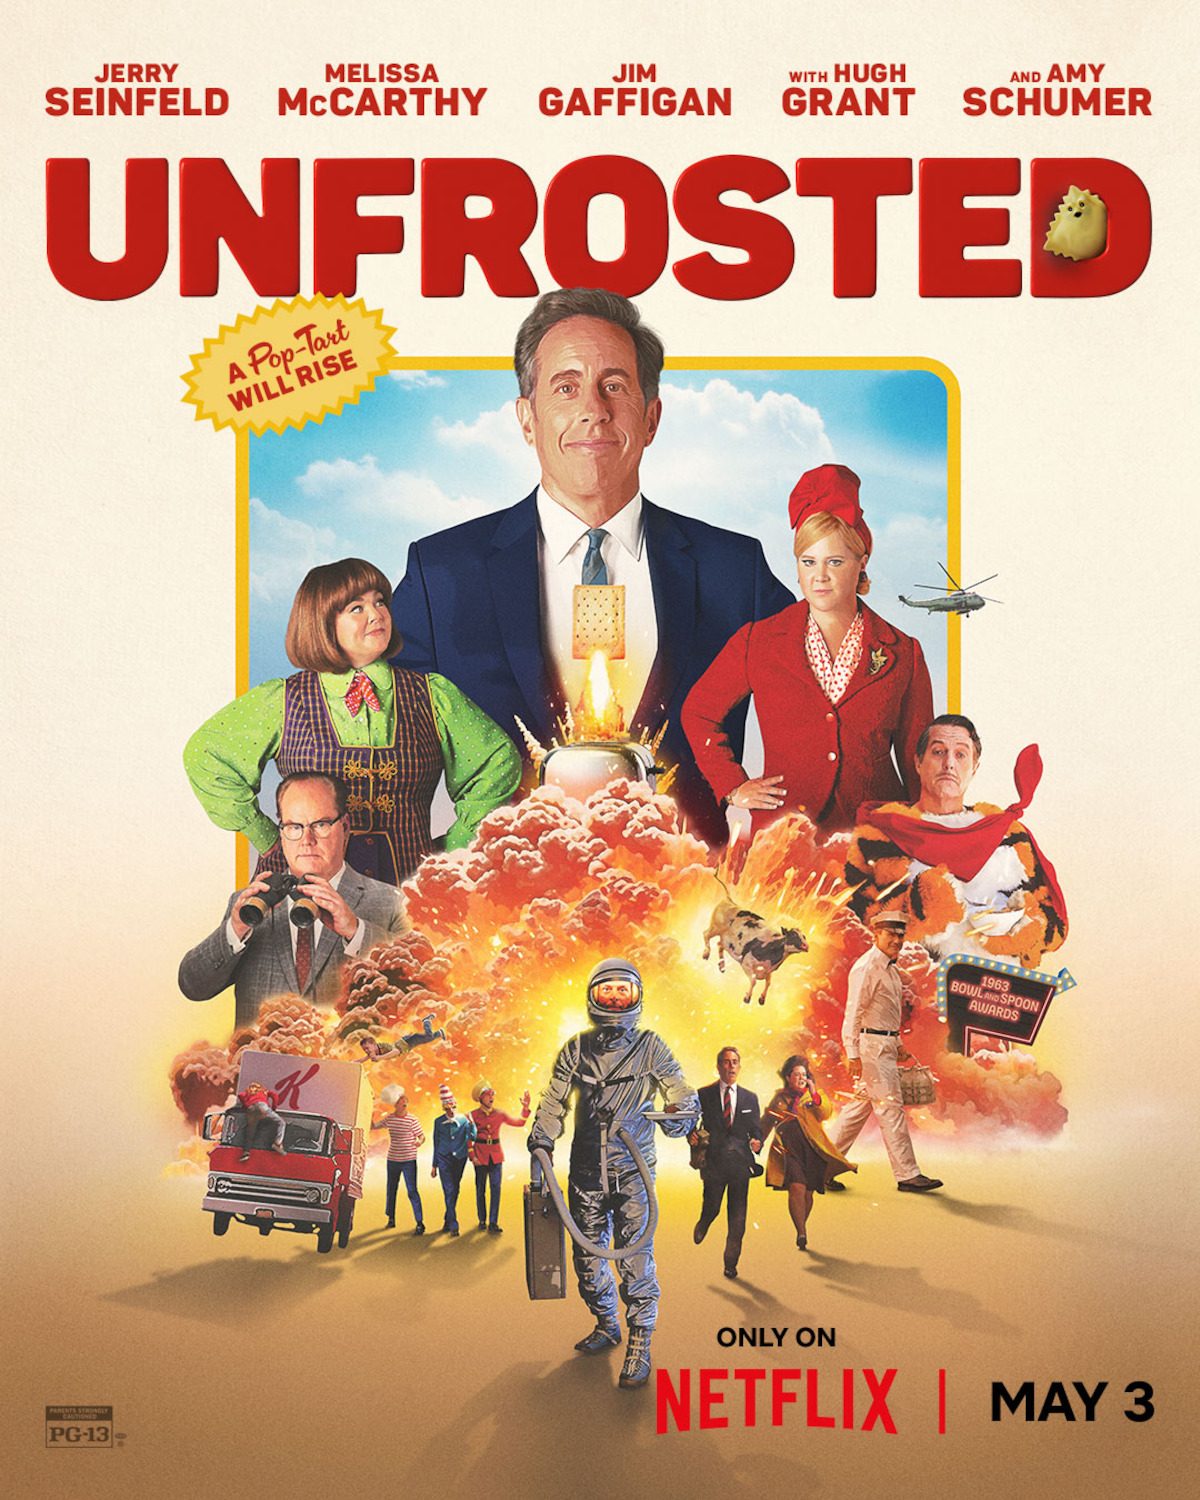 ‘Unfrosted’ only on Netflix May 3.